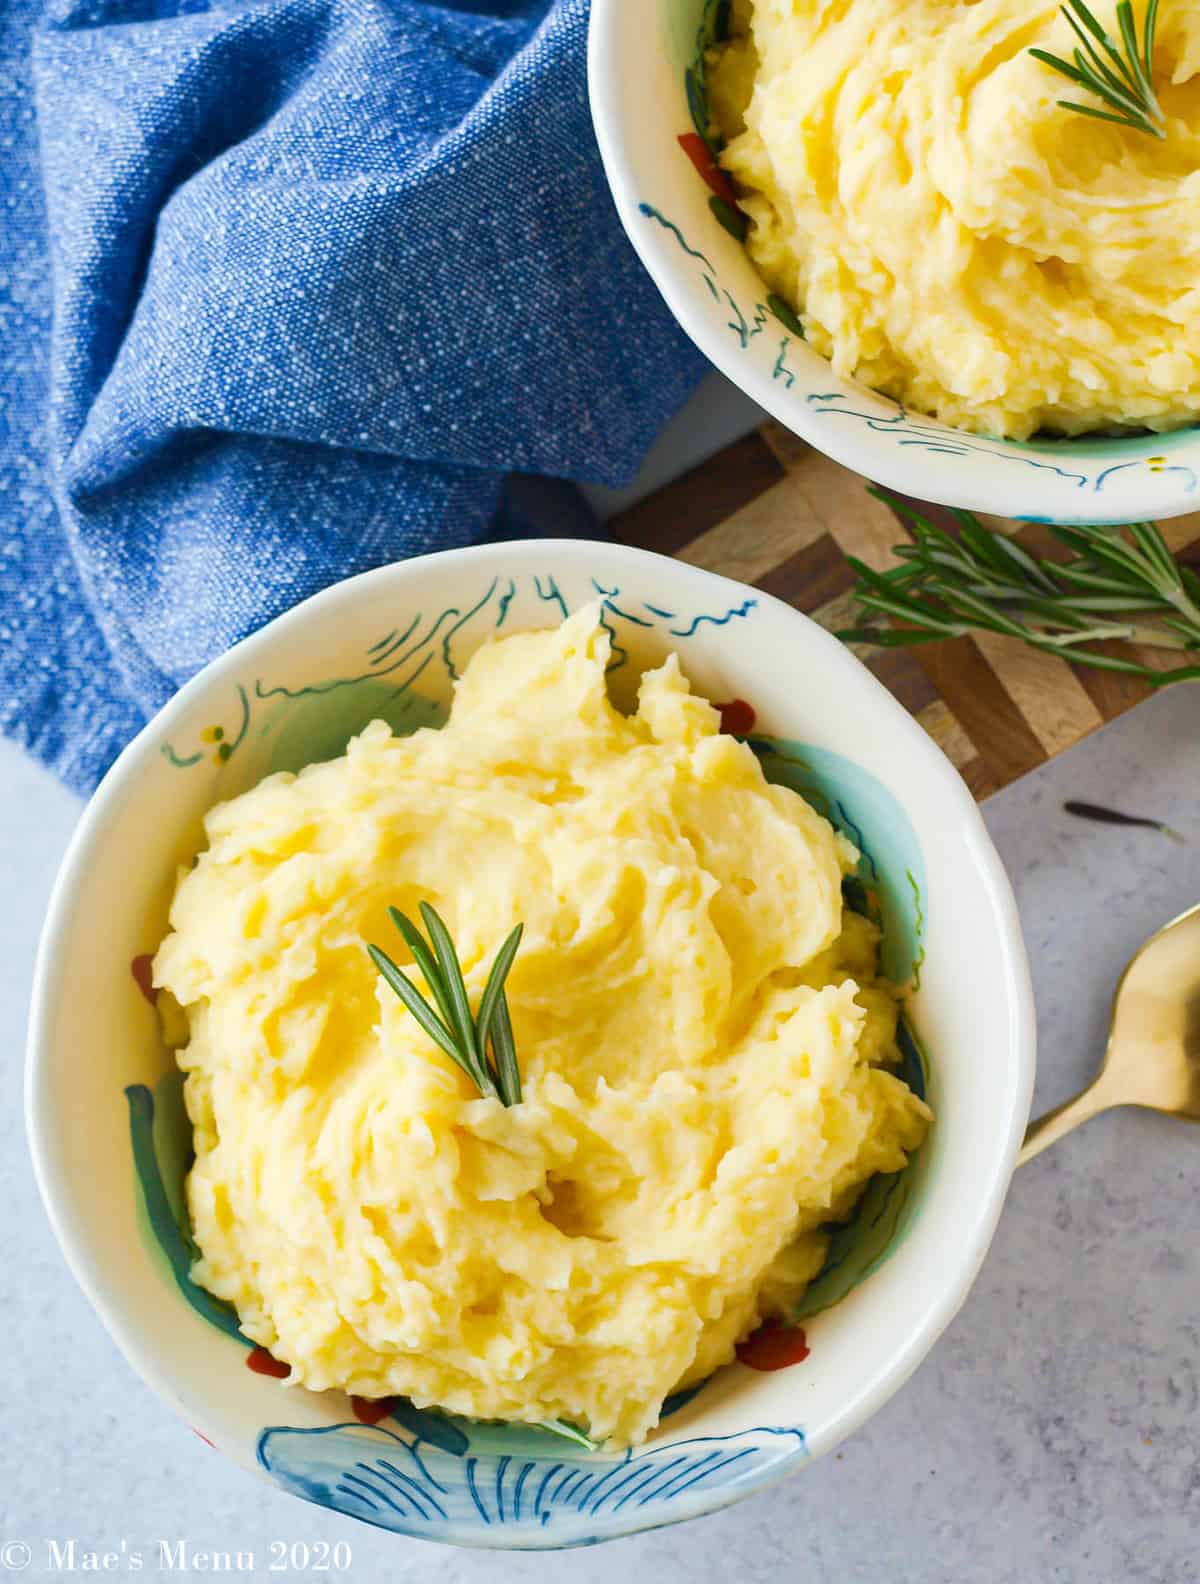 Overhead shot of a bowl of mashed potatoes with out butter with a small sprig of rosemary.